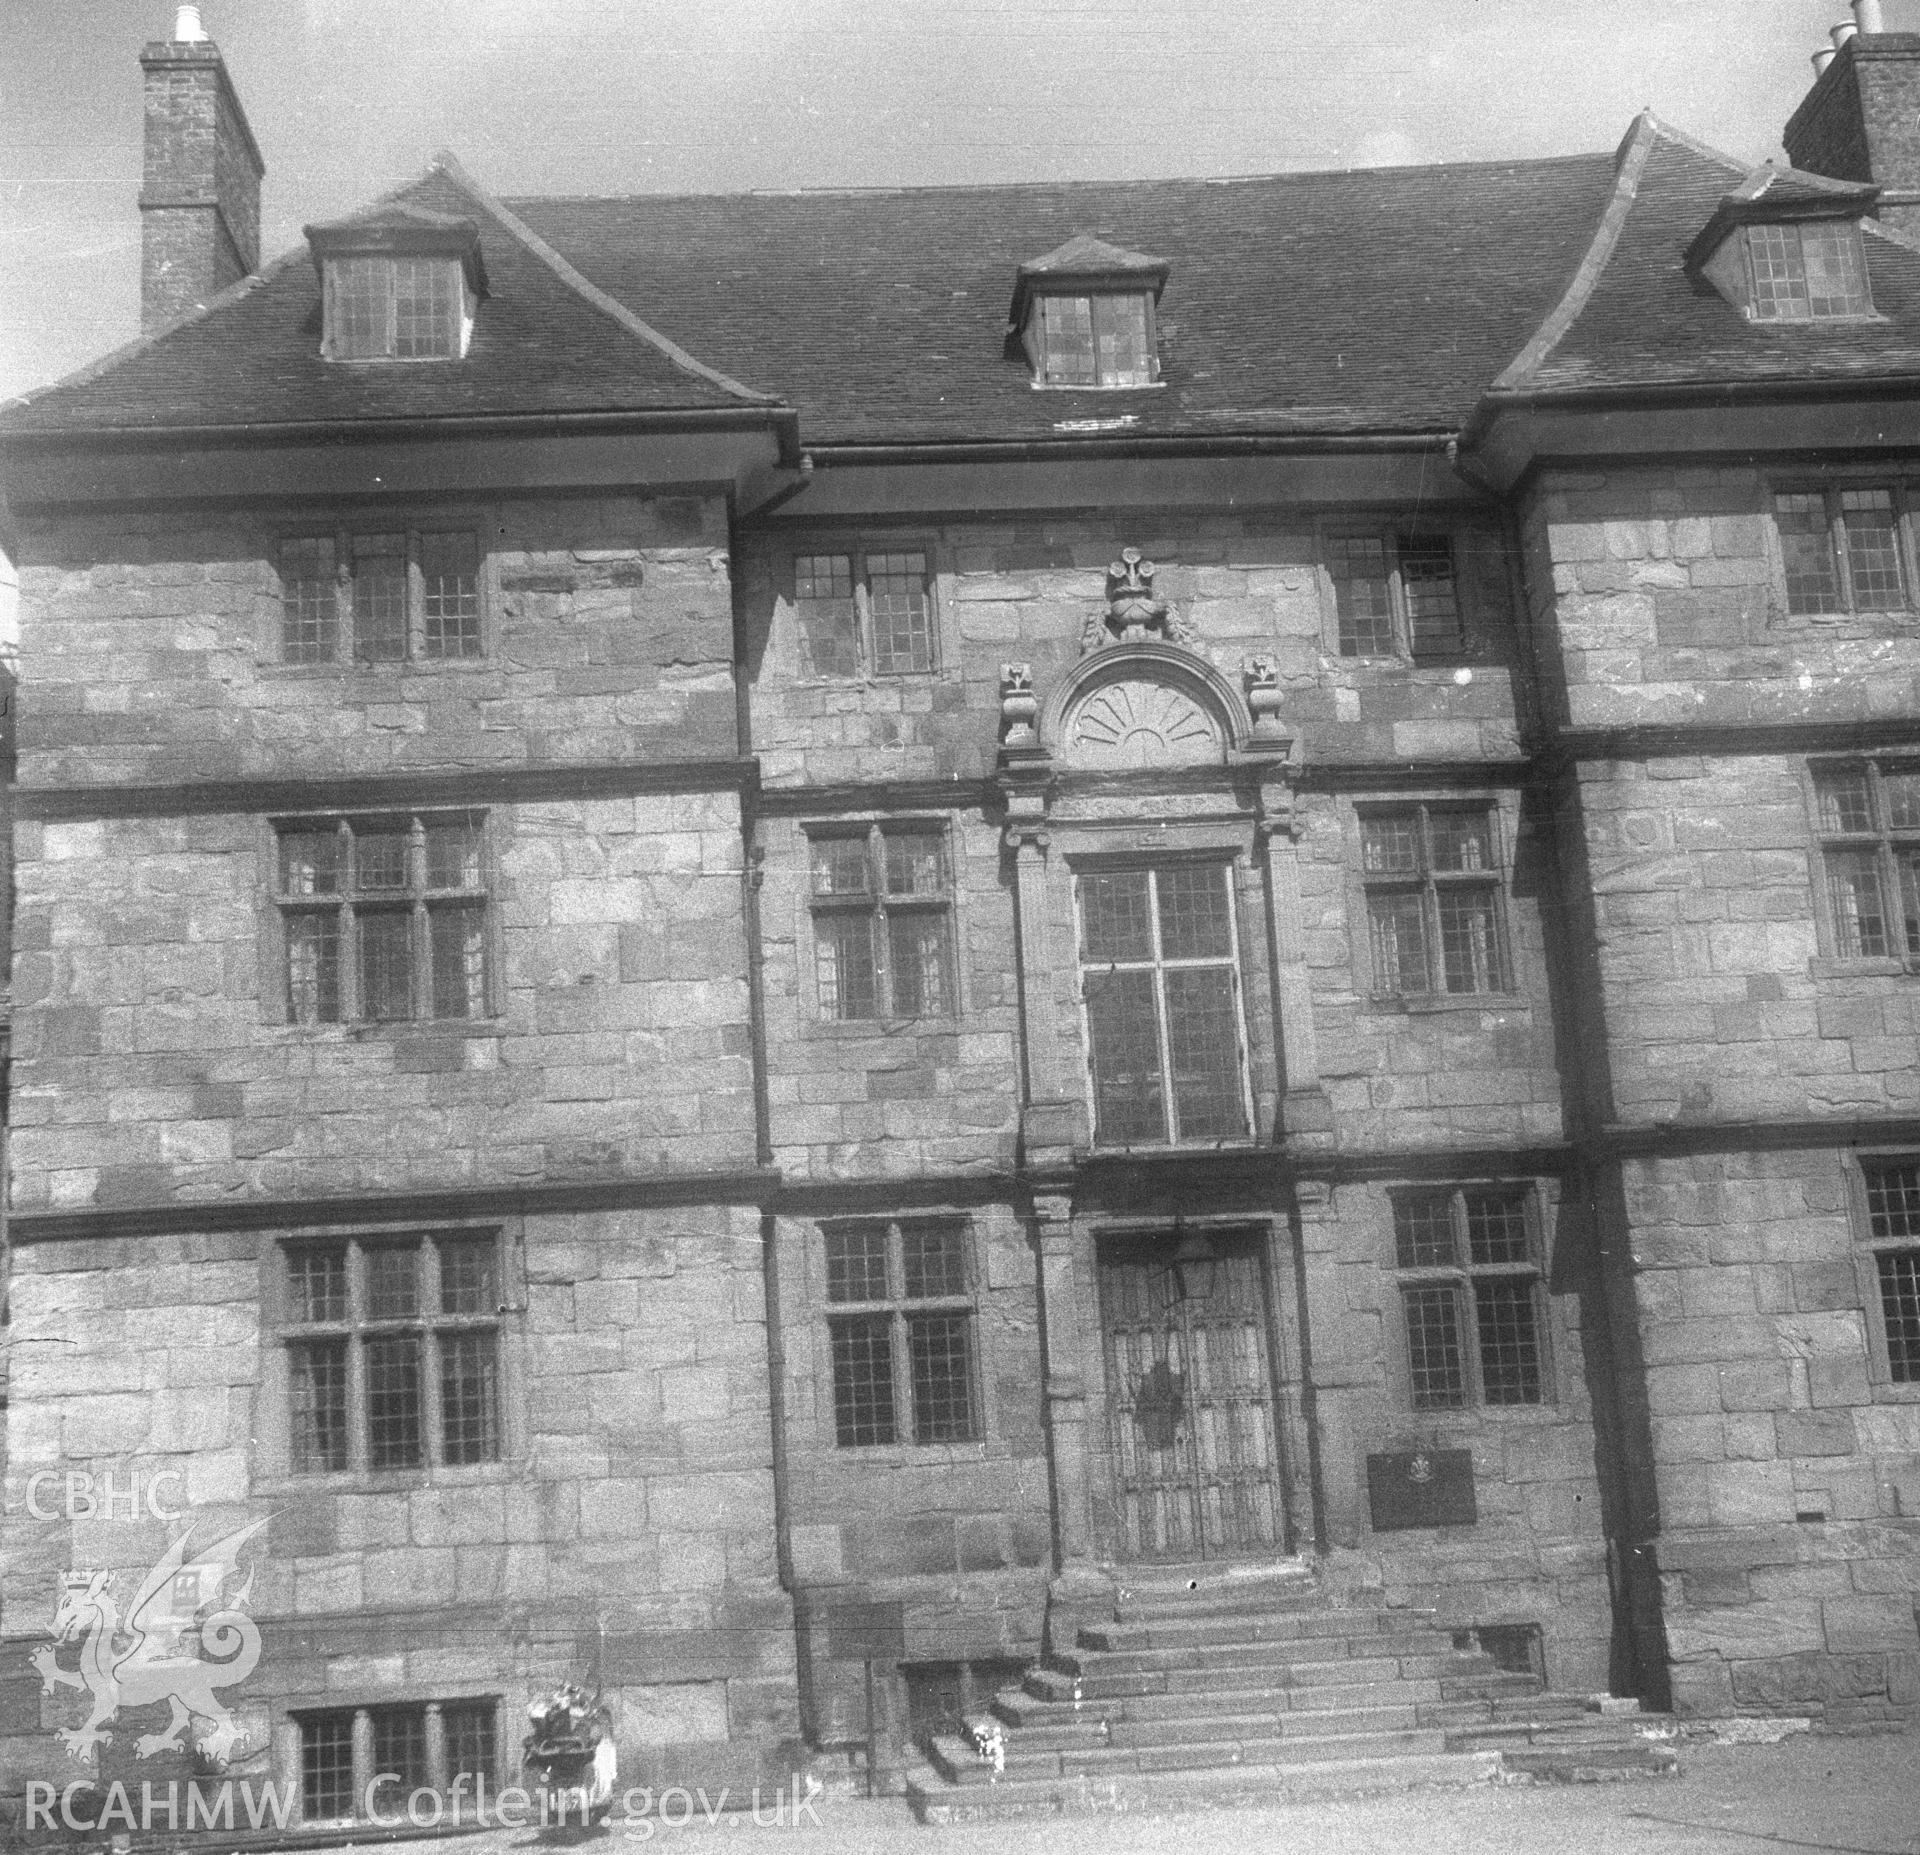 Digital copy of a nitrate negative showing exterior front view of Castle House, Monmouth.